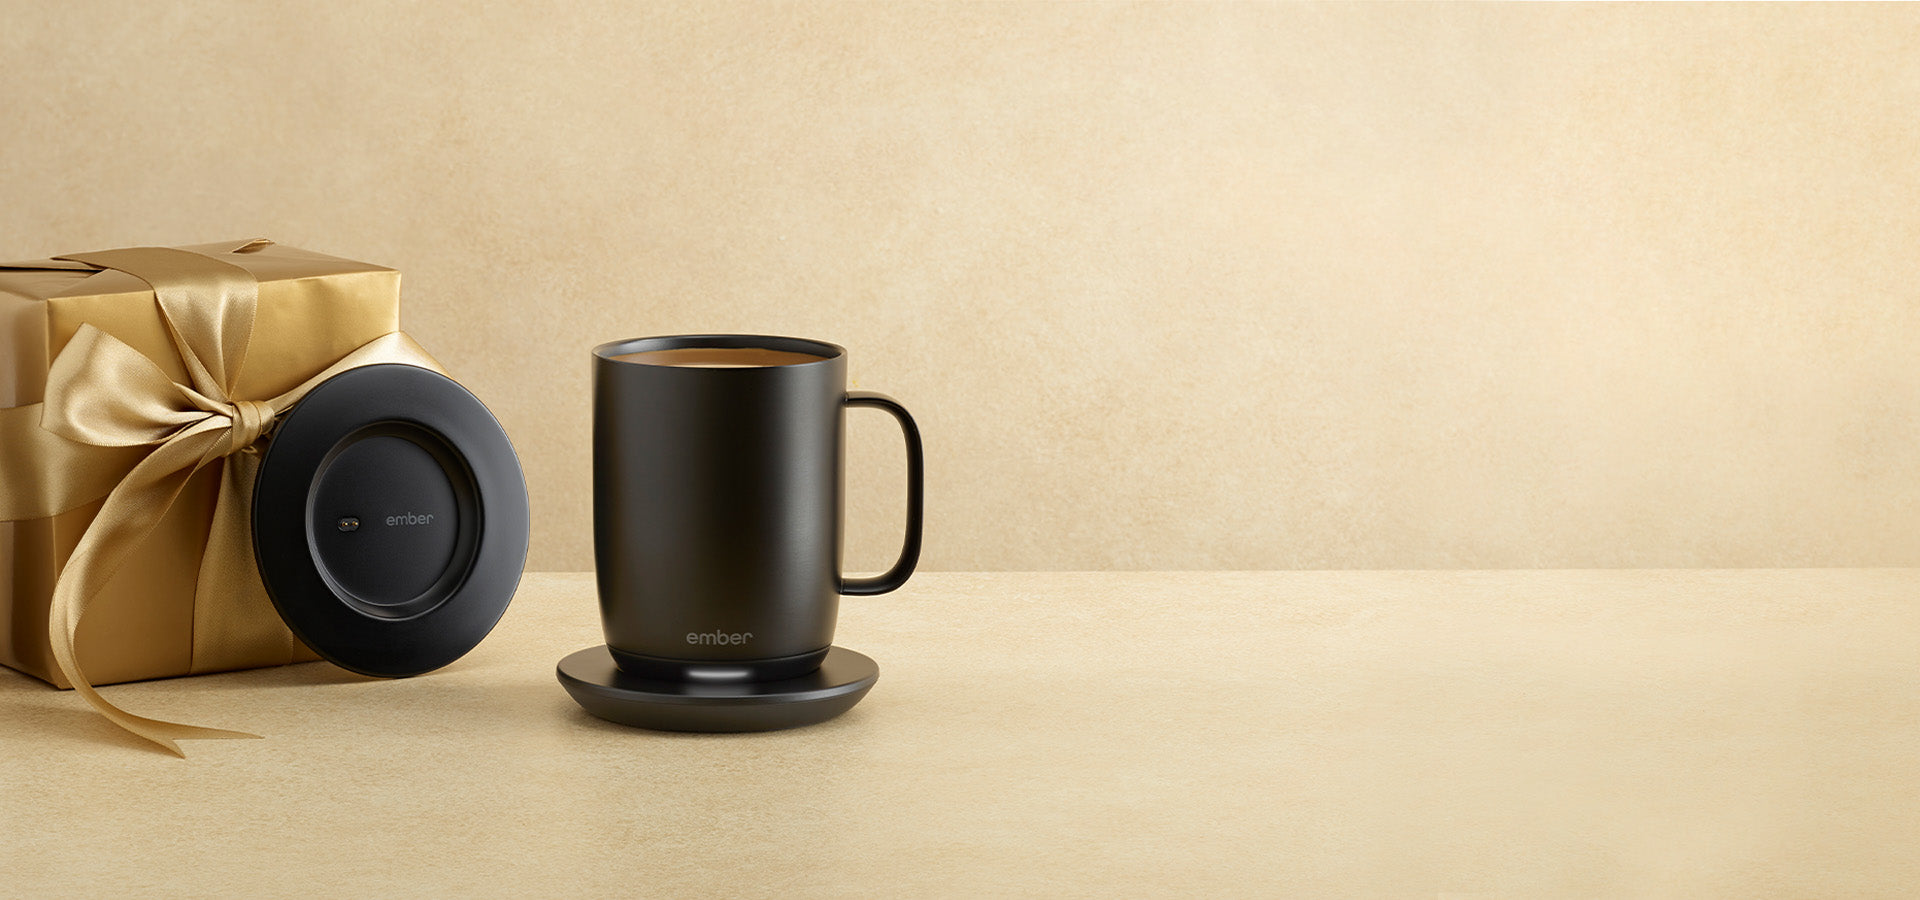 This smart temperature mug is the hottest gift of the holiday season